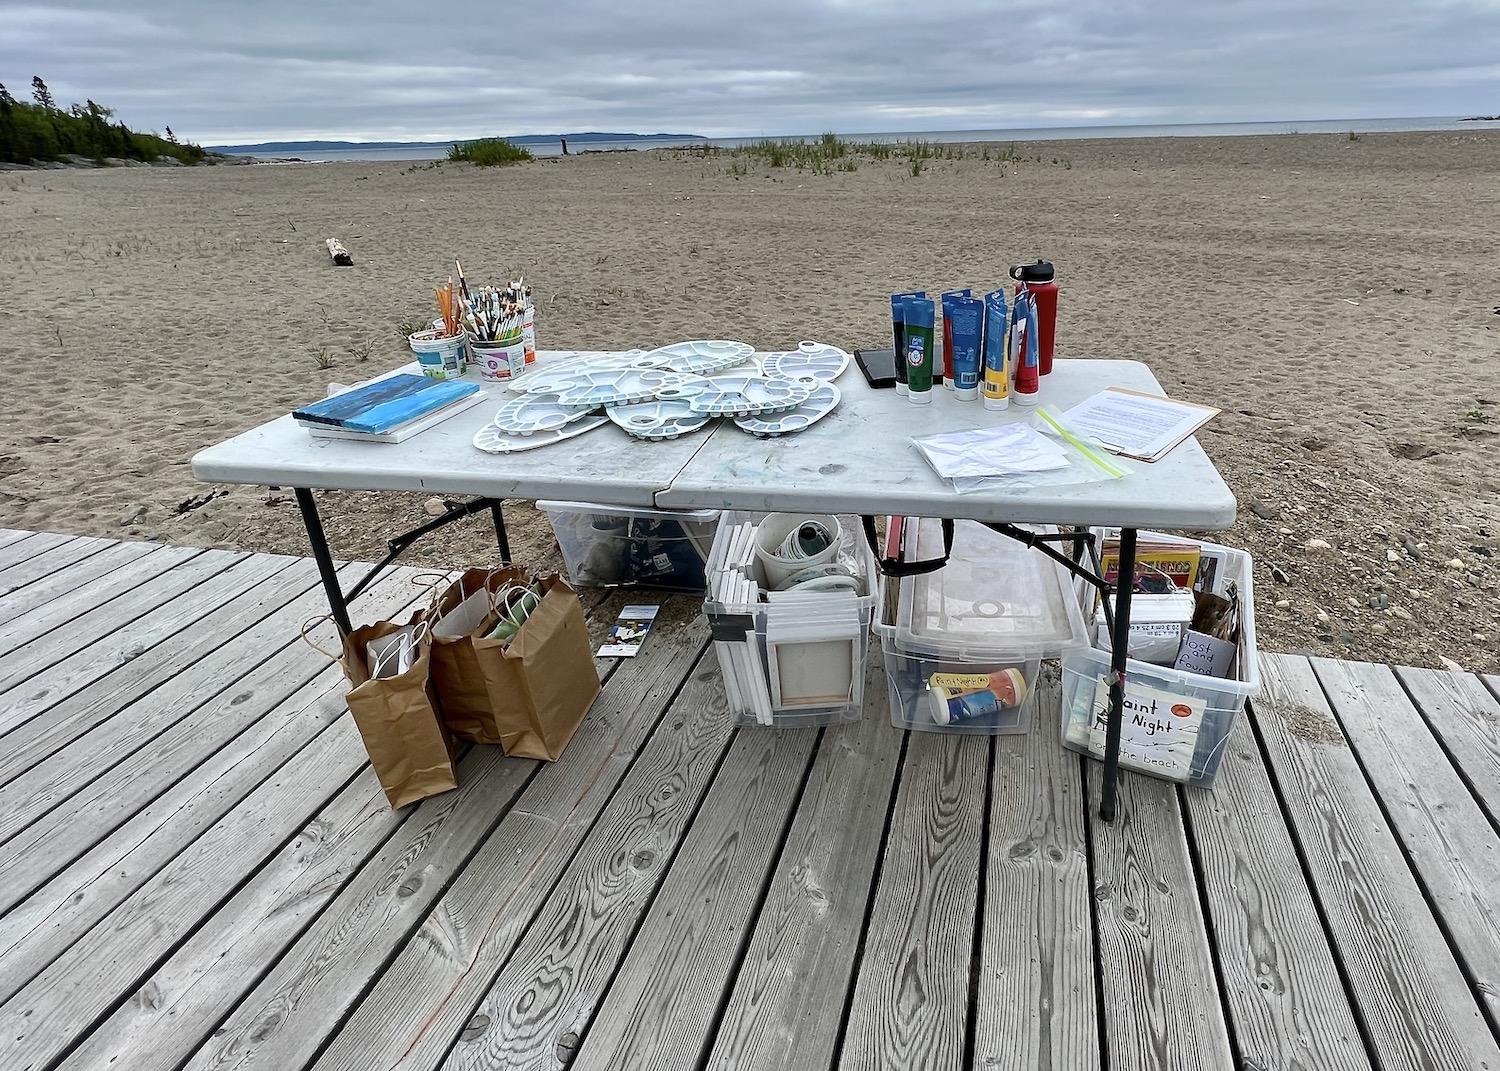 Parks Canada sets up its "Painting Superior" experience by the Terrace Bay Beach Pavilion.